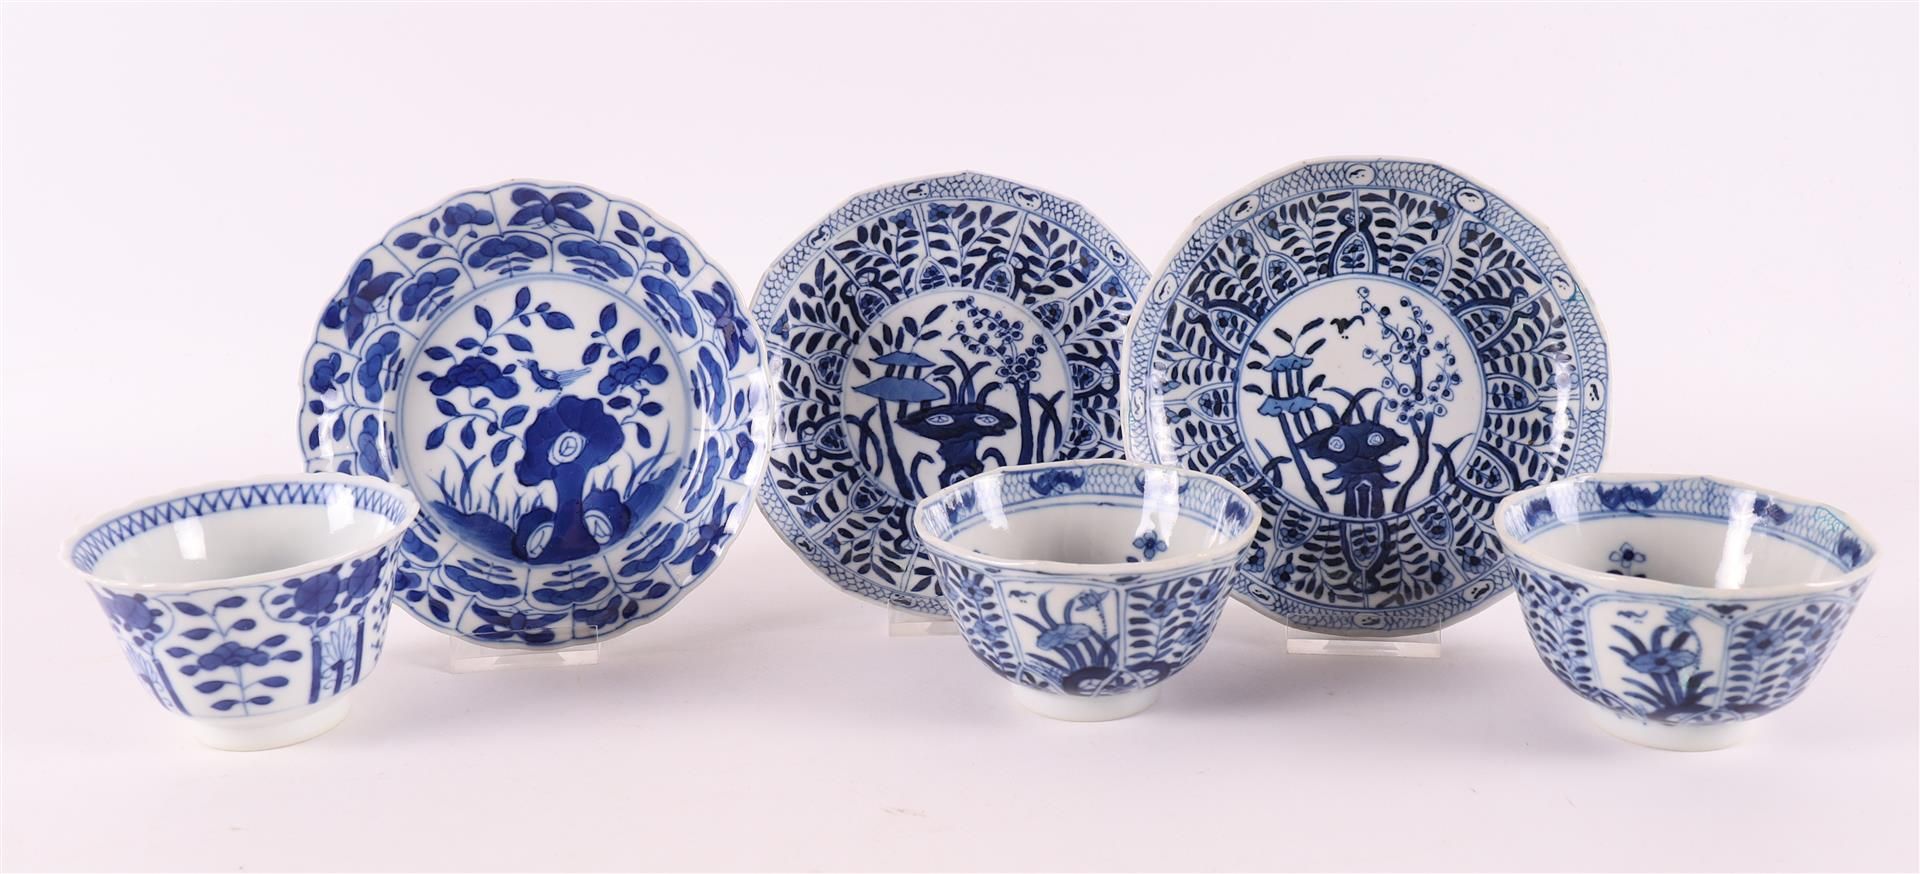 Three various blue/white porcelain cups and saucers, China, 1st half of the 19th century. Blue